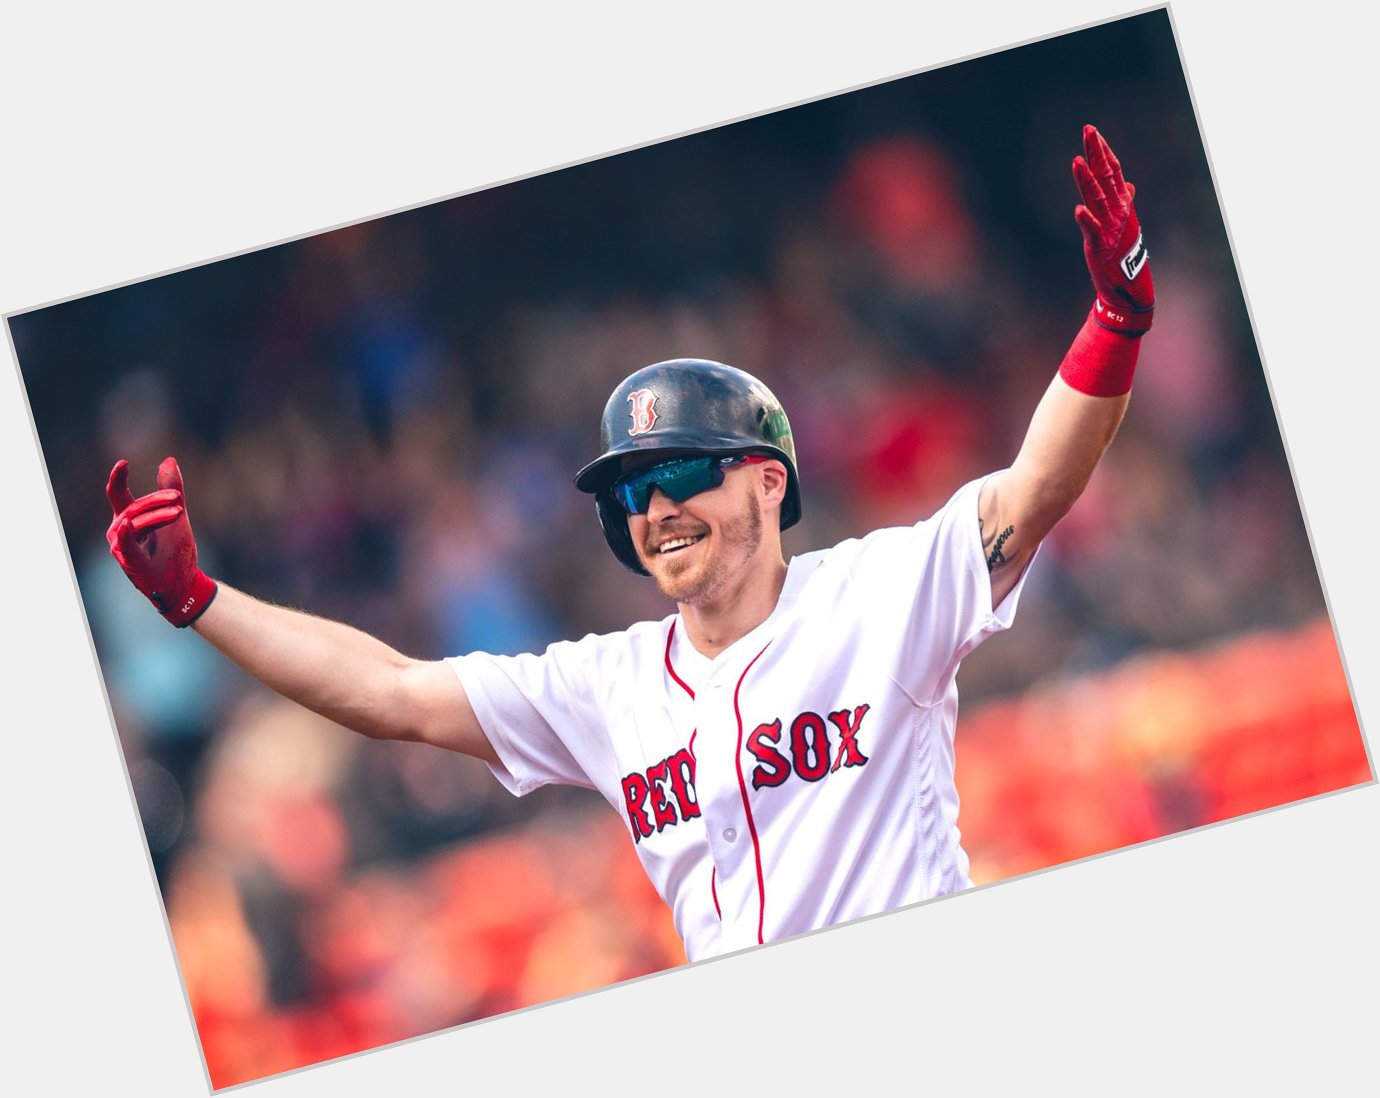 Happy birthday to my all-time favorite player, Brock Holt! 